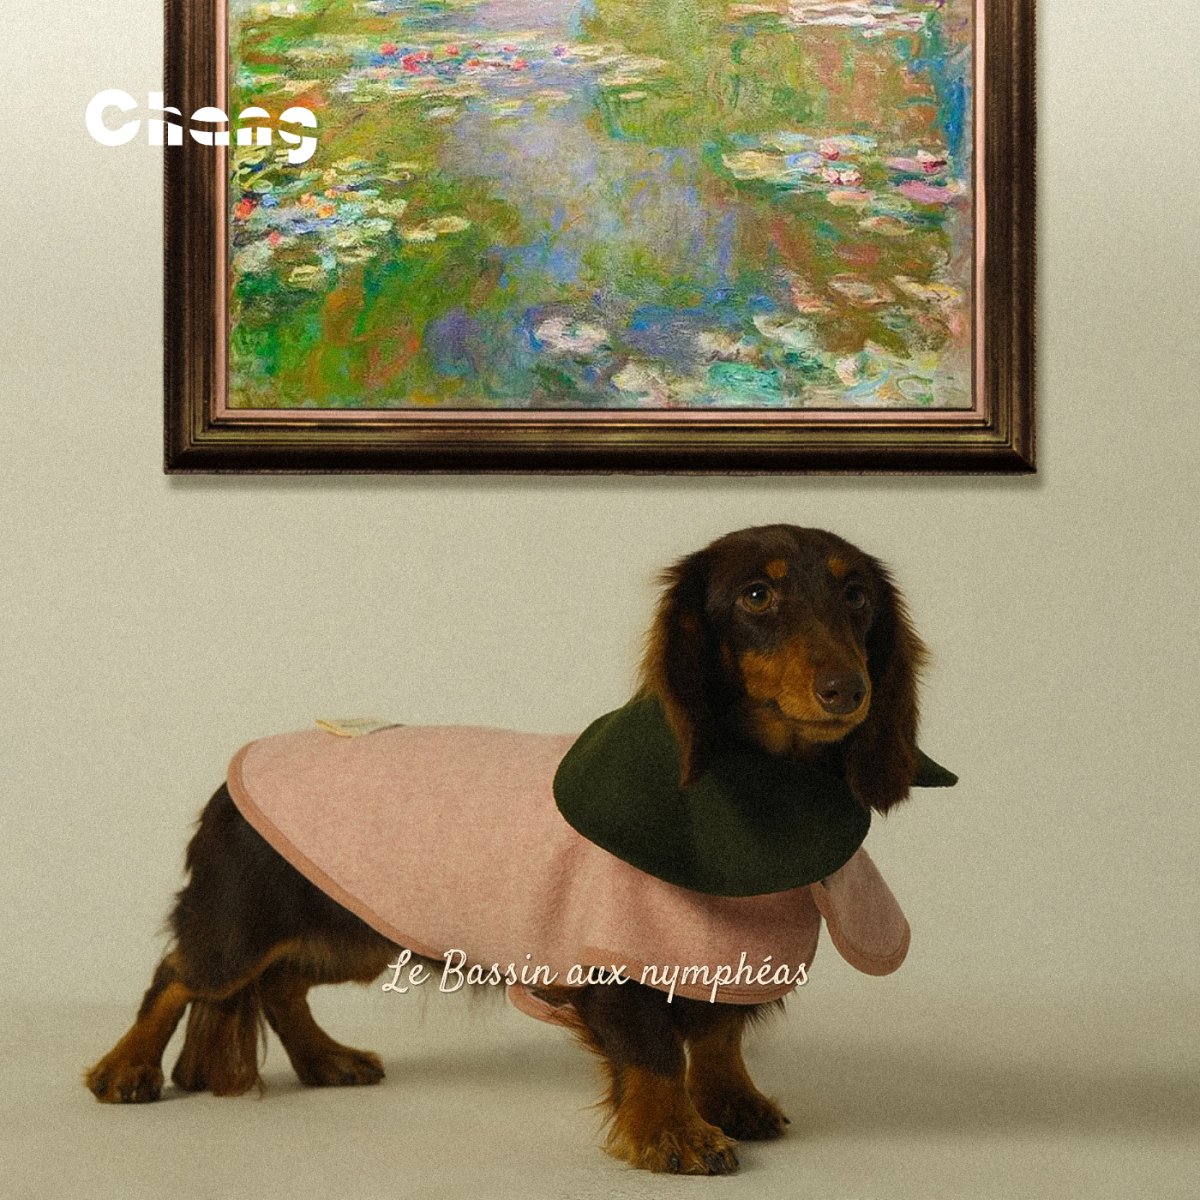 Dachshund Coat | GREENHOUSE FLORAL WOOL COAT - Le Bassin aux nymphéas - Chang